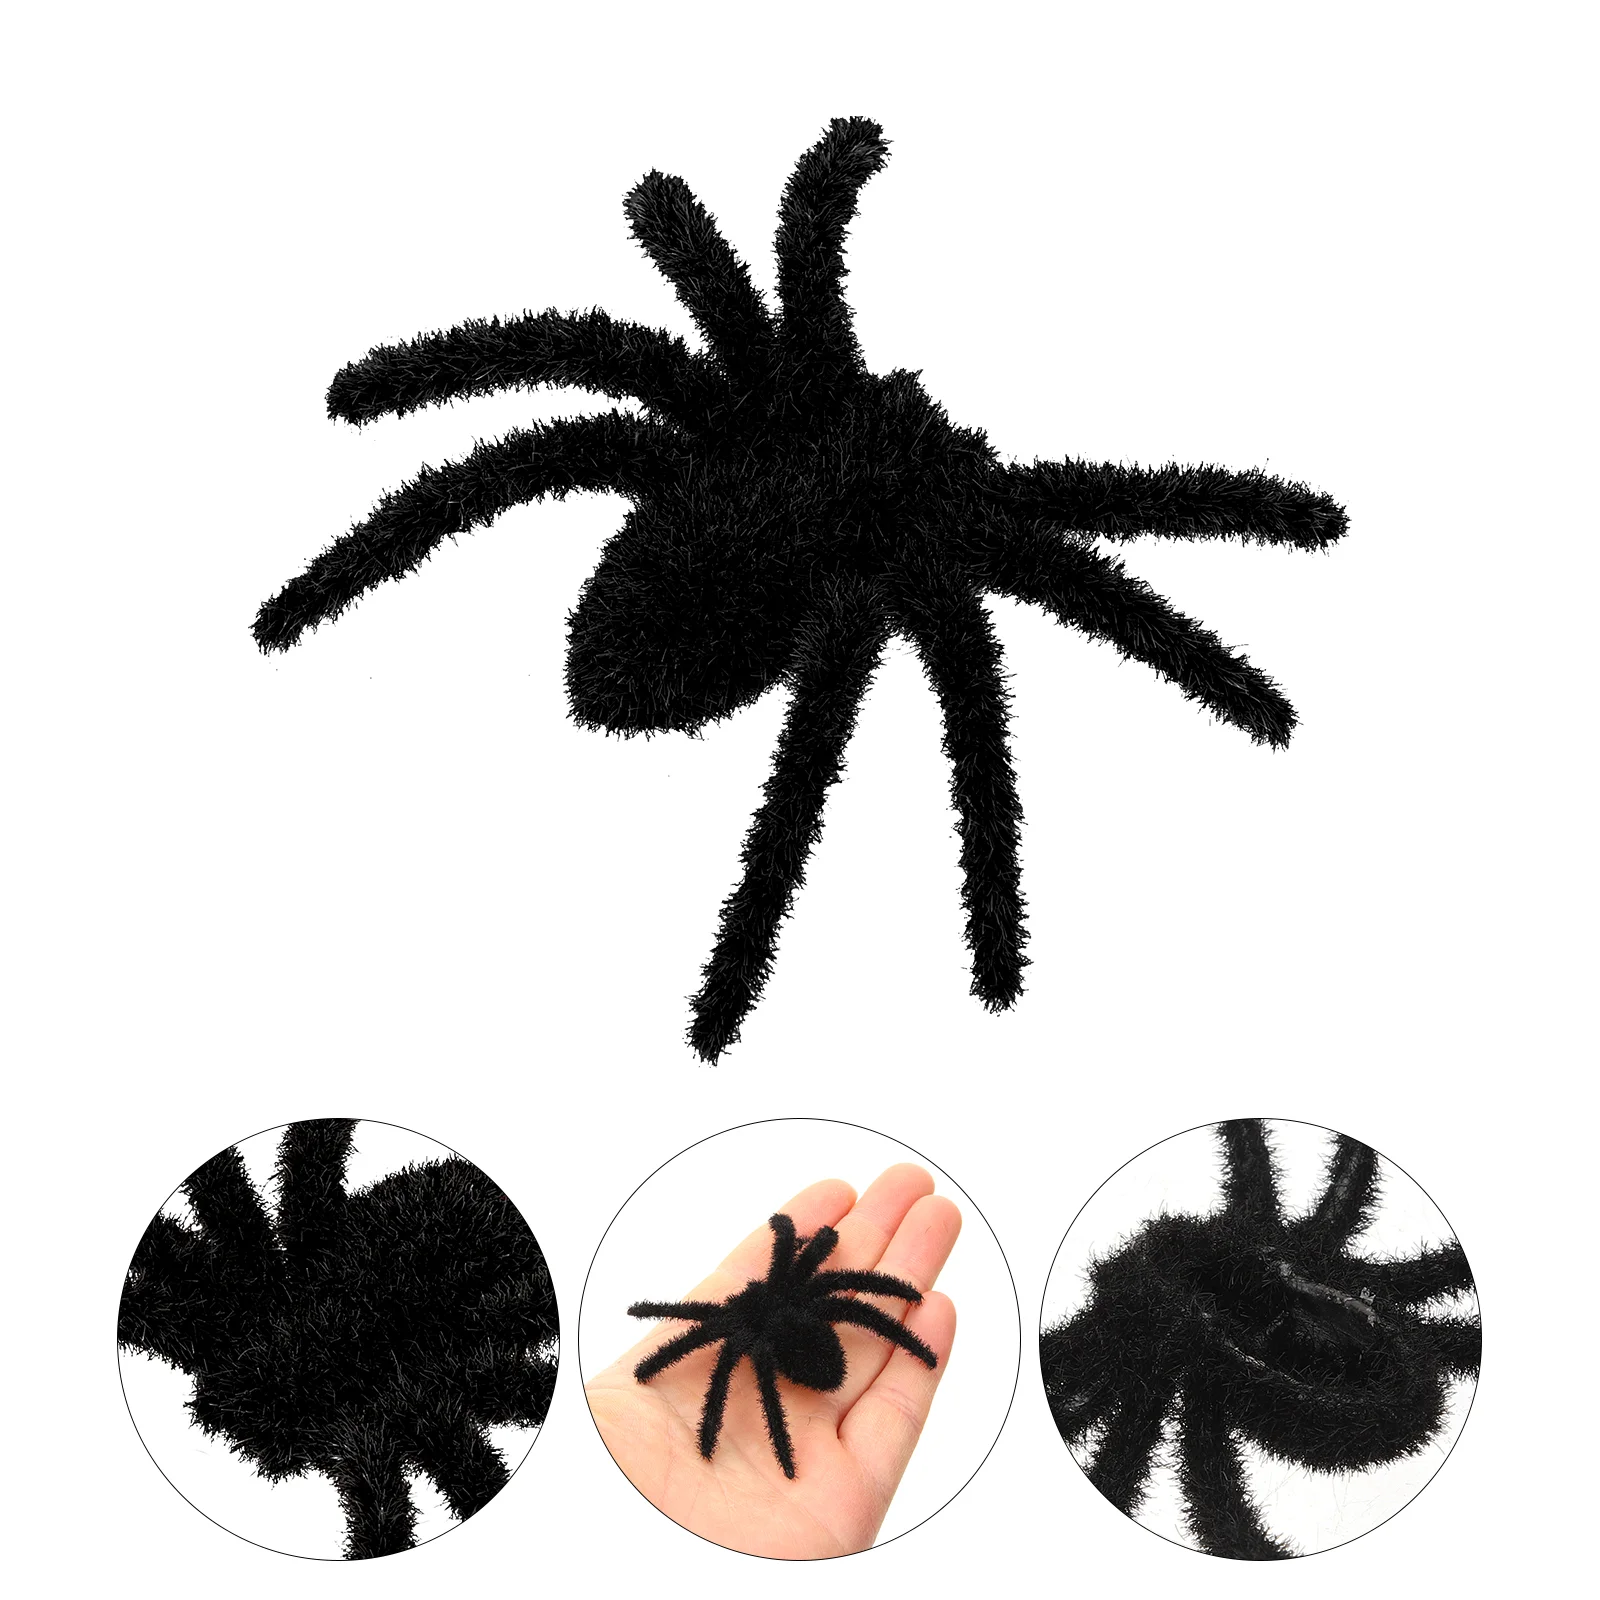 

12 Pcs Spider Props Plastic Outdoor Playsets Halloween Decorations Indoor Creepy Giant Furry Flocking Accessory Party